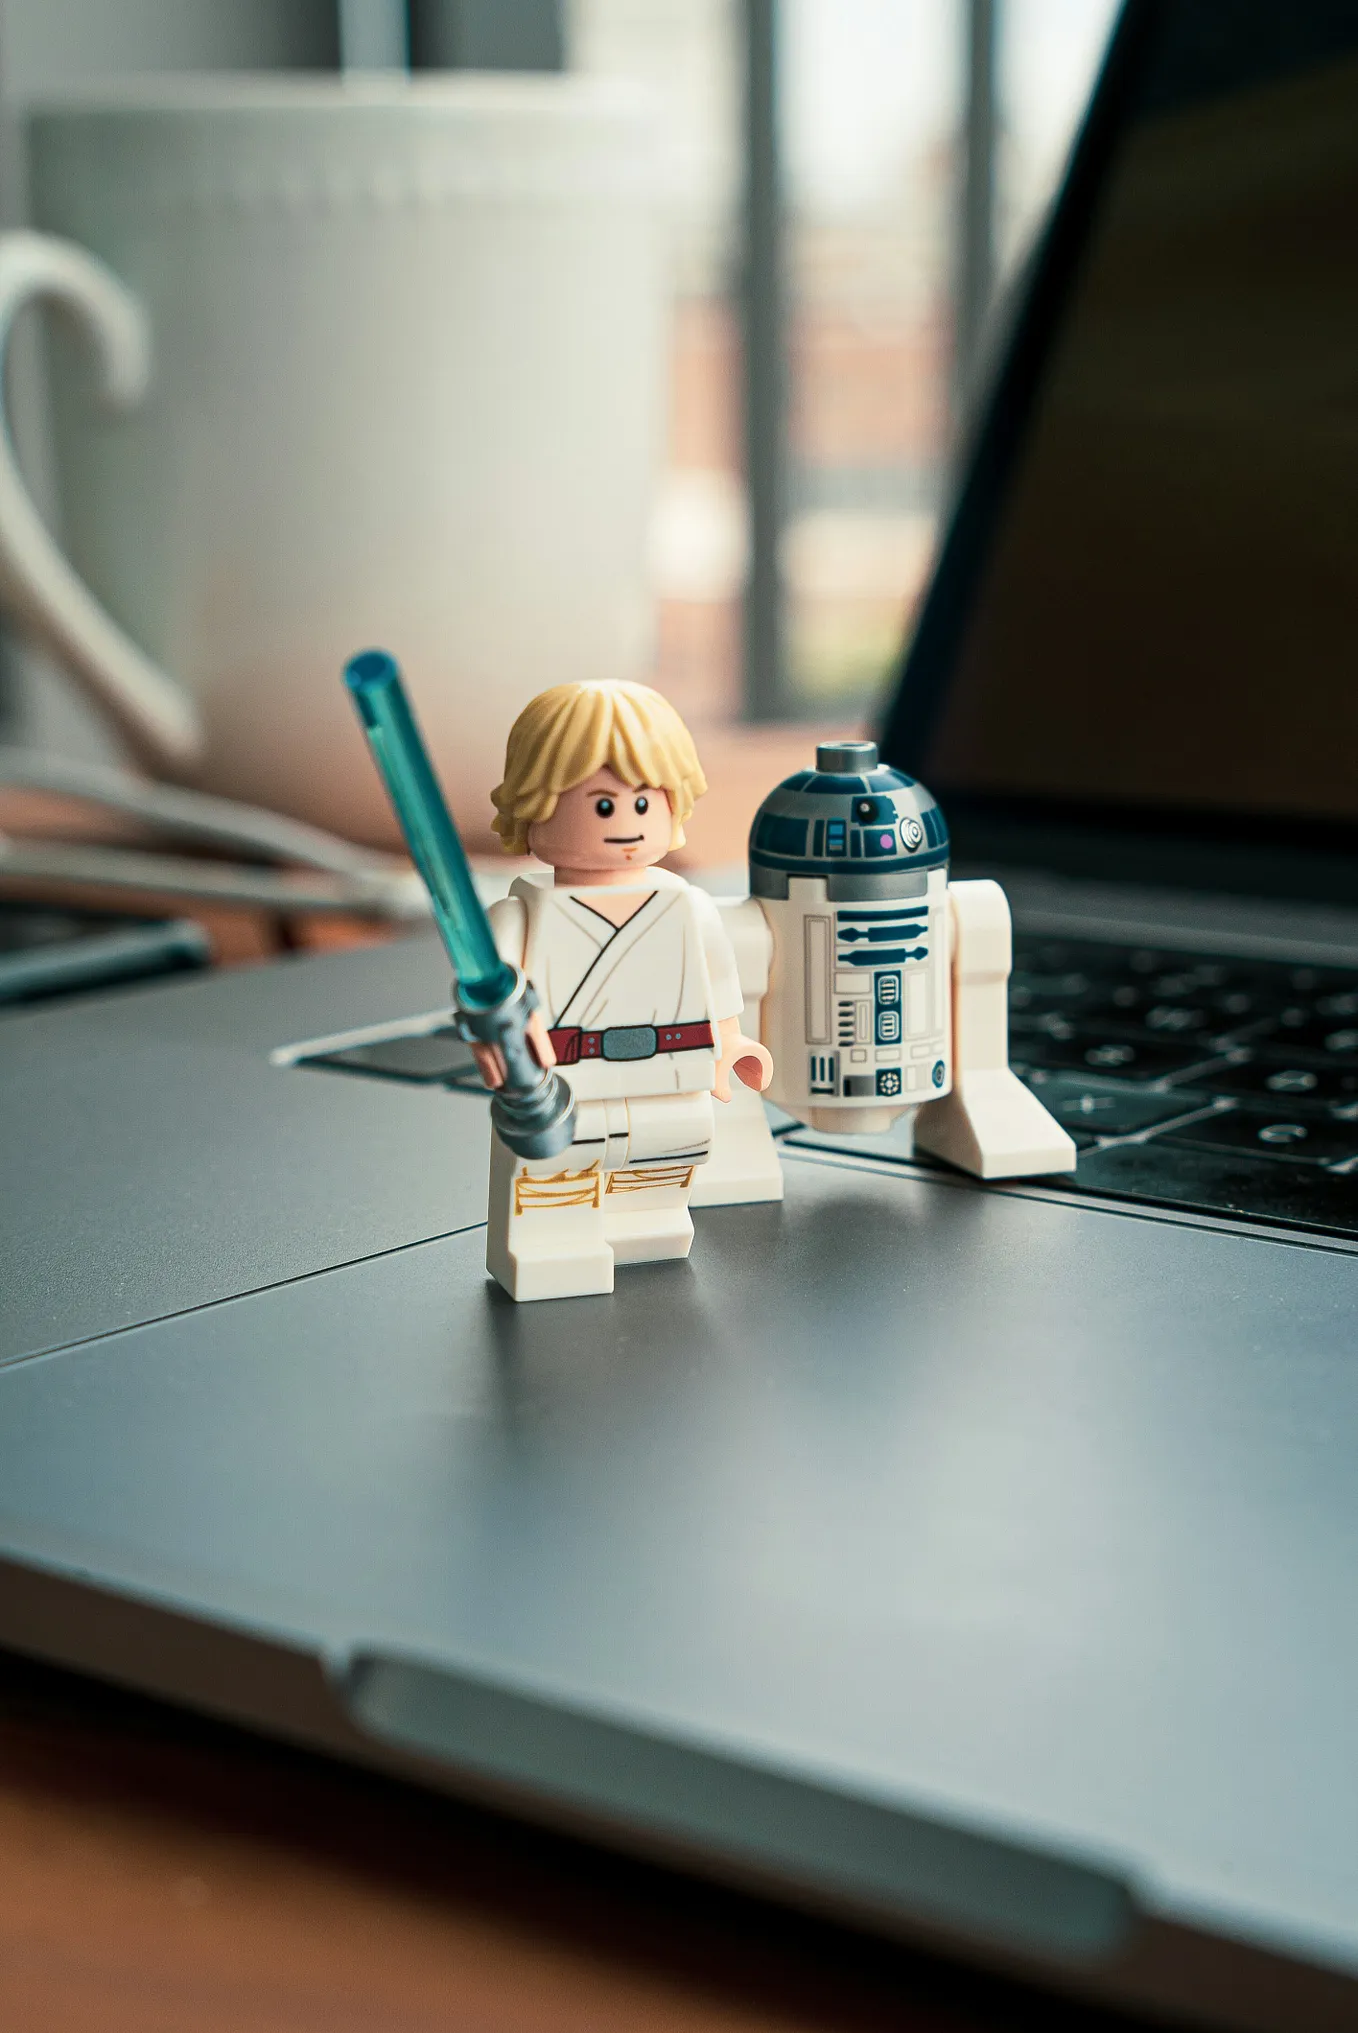 Every Technology “New Hope” Needs a Mentor